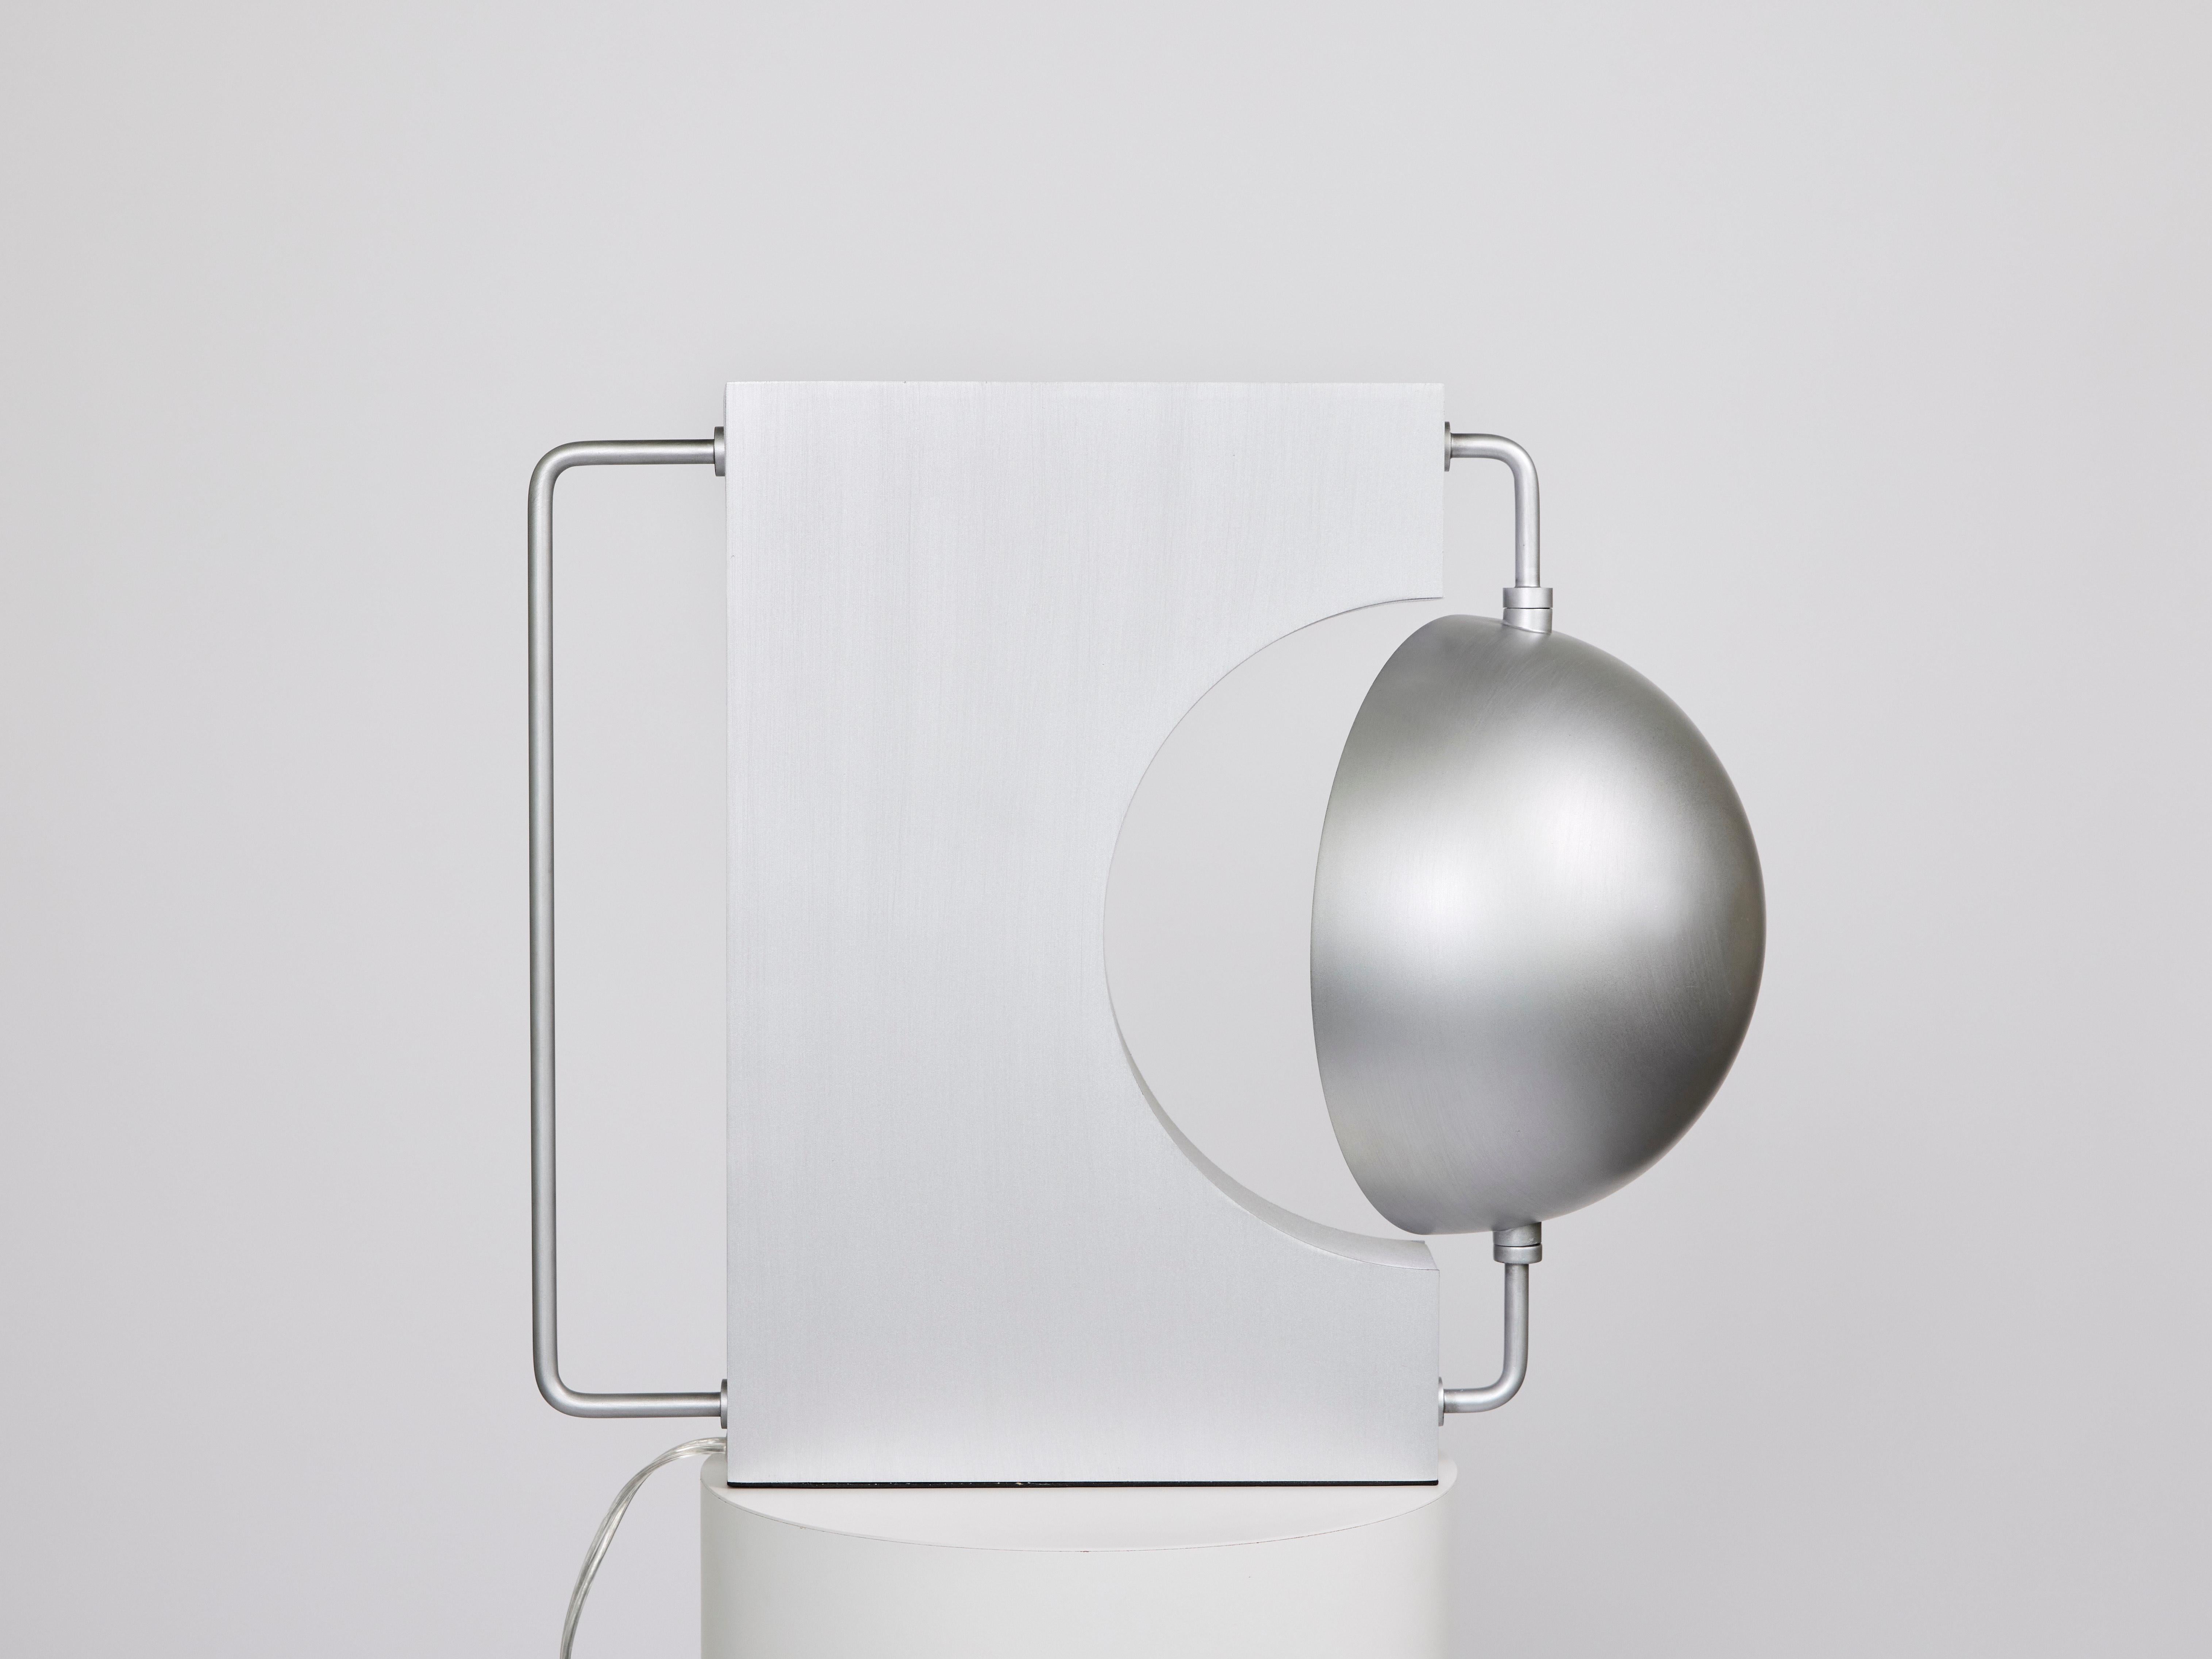 Half Table Lamp (Brushed Aluminum)

Materials: hand-brushed aluminum or powder-coated golden black 
Dimensions: W20 x D11 x H17 inches
Lamping: G9 2700K/3000K dimmable, UL Listed 

A table lamp that plays with contrasting elements of roundness and